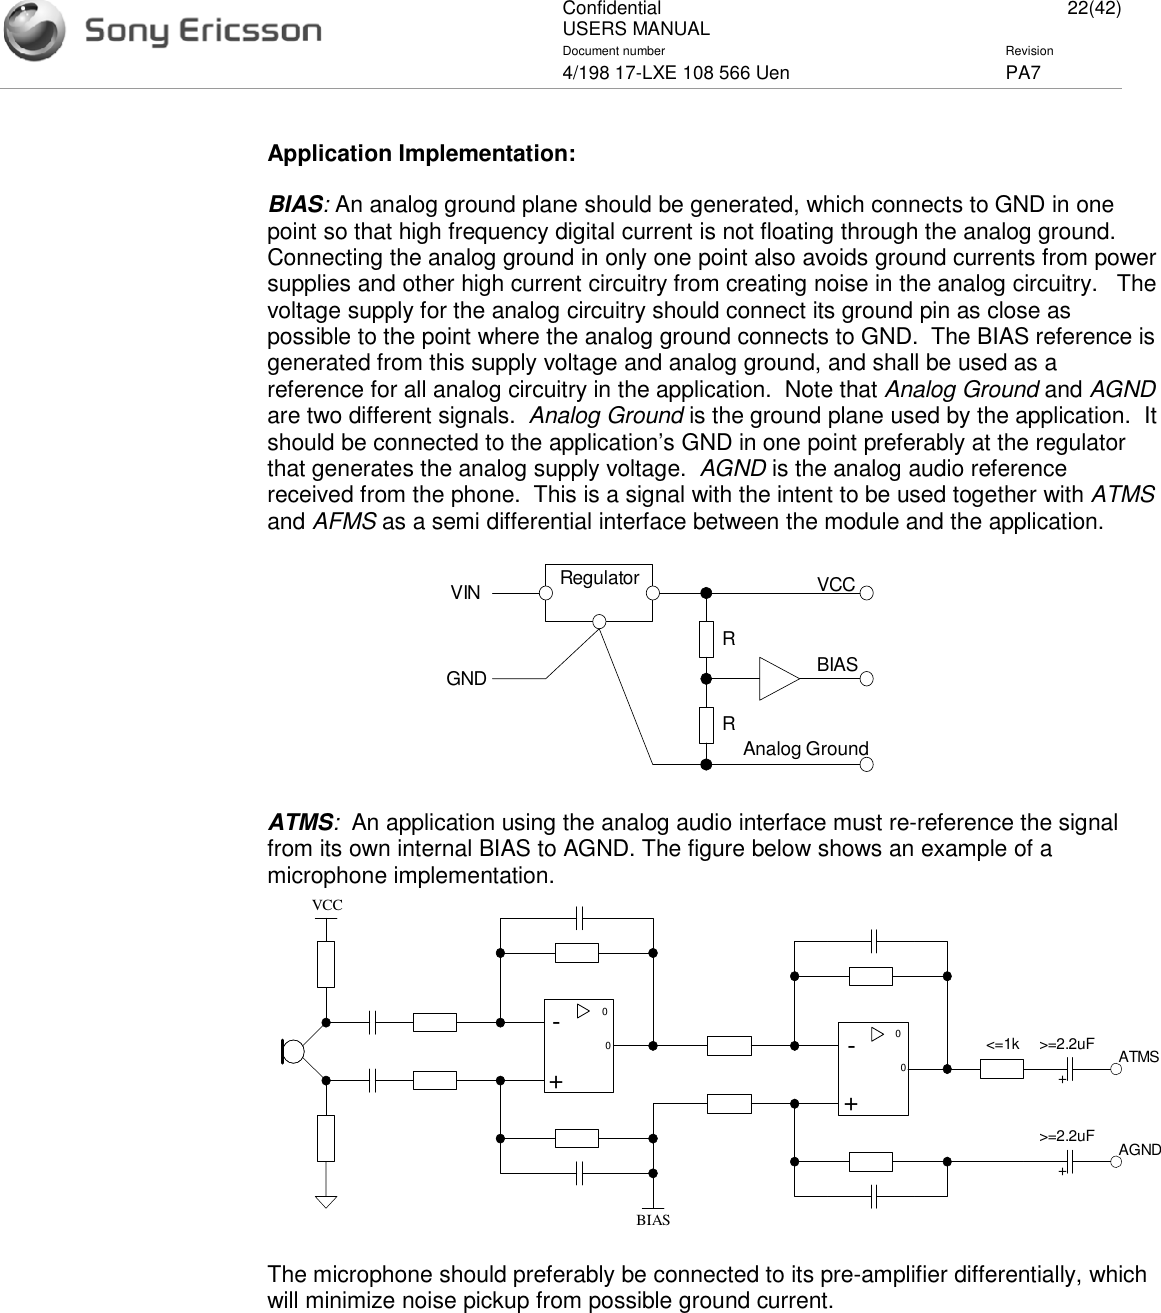 ConfidentialUSERS MANUAL 22(42)Document number Revision4/198 17-LXE 108 566 Uen PA7Application Implementation:BIAS:An analog ground plane should be generated, which connects to GND in onepoint so that high frequency digital current is not floating through the analog ground.Connecting the analog ground in only one point also avoids ground currents from powersupplies and other high current circuitry from creating noise in the analog circuitry. Thevoltage supply for the analog circuitry should connect its ground pin as close aspossible to the point where the analog ground connects to GND. The BIAS reference isgenerated from this supply voltage and analog ground, and shall be used as areference for all analog circuitry in the application. Note that Analog Ground and AGNDare two different signals. Analog Ground is the ground plane used by the application. Itshould be connected to the application’s GND in one point preferably at the regulatorthat generates the analog supply voltage. AGND is the analog audio referencereceived from the phone. This is a signal with the intent to be used together with ATMSand AFMS as a semi differential interface between the module and the application.RegulatorVINGNDRRVCCBIASAnalog GroundATMS:An application using the analog audio interface must re-reference the signalfrom its own internal BIAS to AGND. The figure below shows an example of amicrophone implementation.0-+0VCC0-+0&lt;=1kBIAS&gt;=2.2uF ATMSAGND&gt;=2.2uF++The microphone should preferably be connected to its pre-amplifier differentially, whichwill minimize noise pickup from possible ground current.